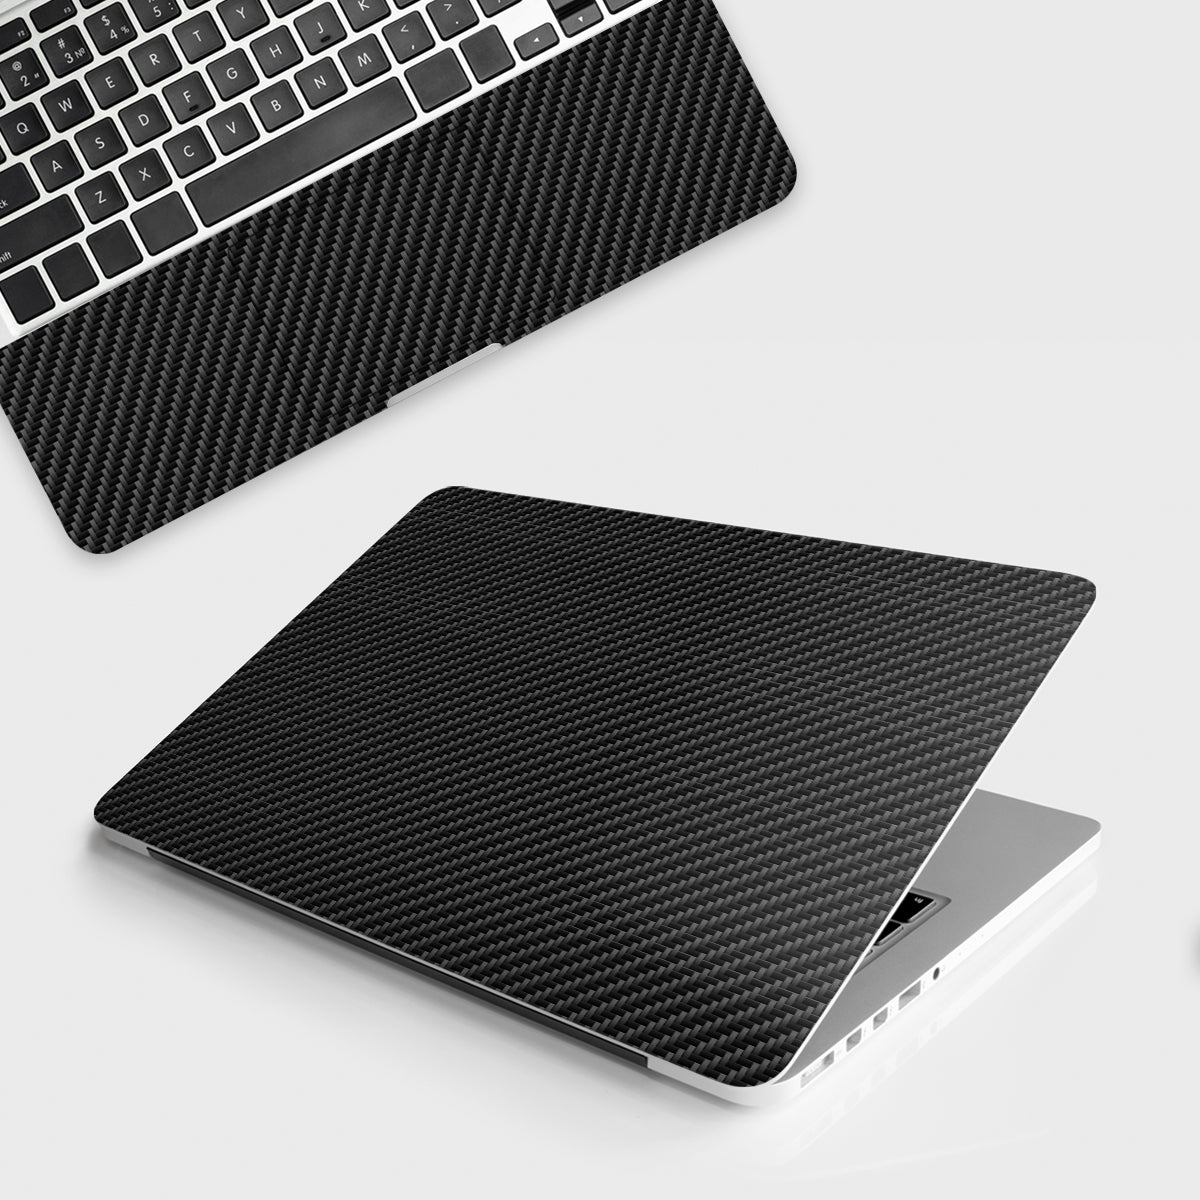 Fomo Store Laptop Skins Abstract Carbon